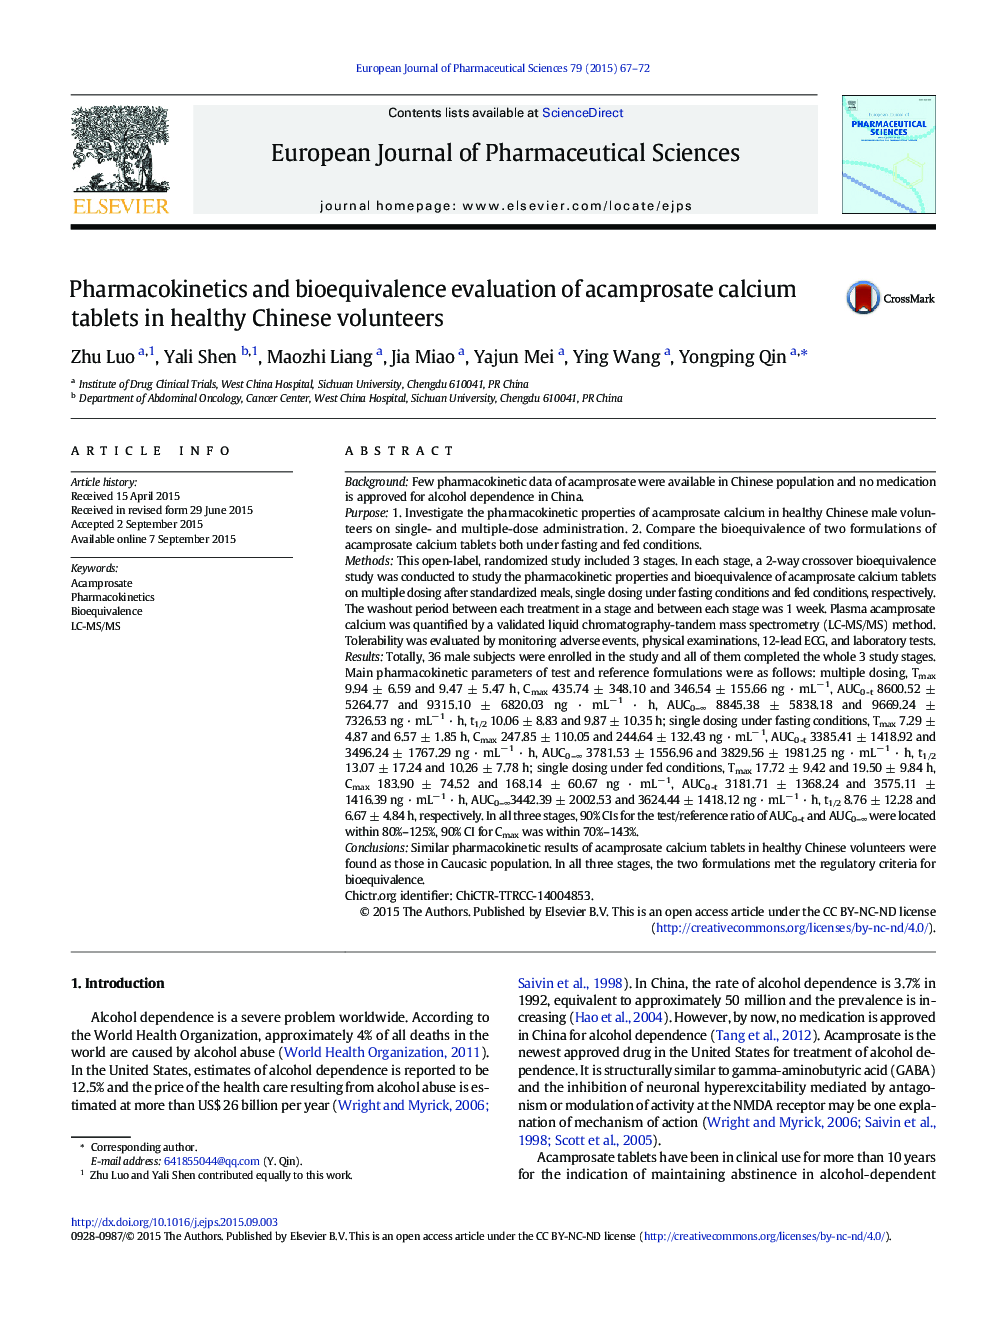 Pharmacokinetics and bioequivalence evaluation of acamprosate calcium tablets in healthy Chinese volunteers